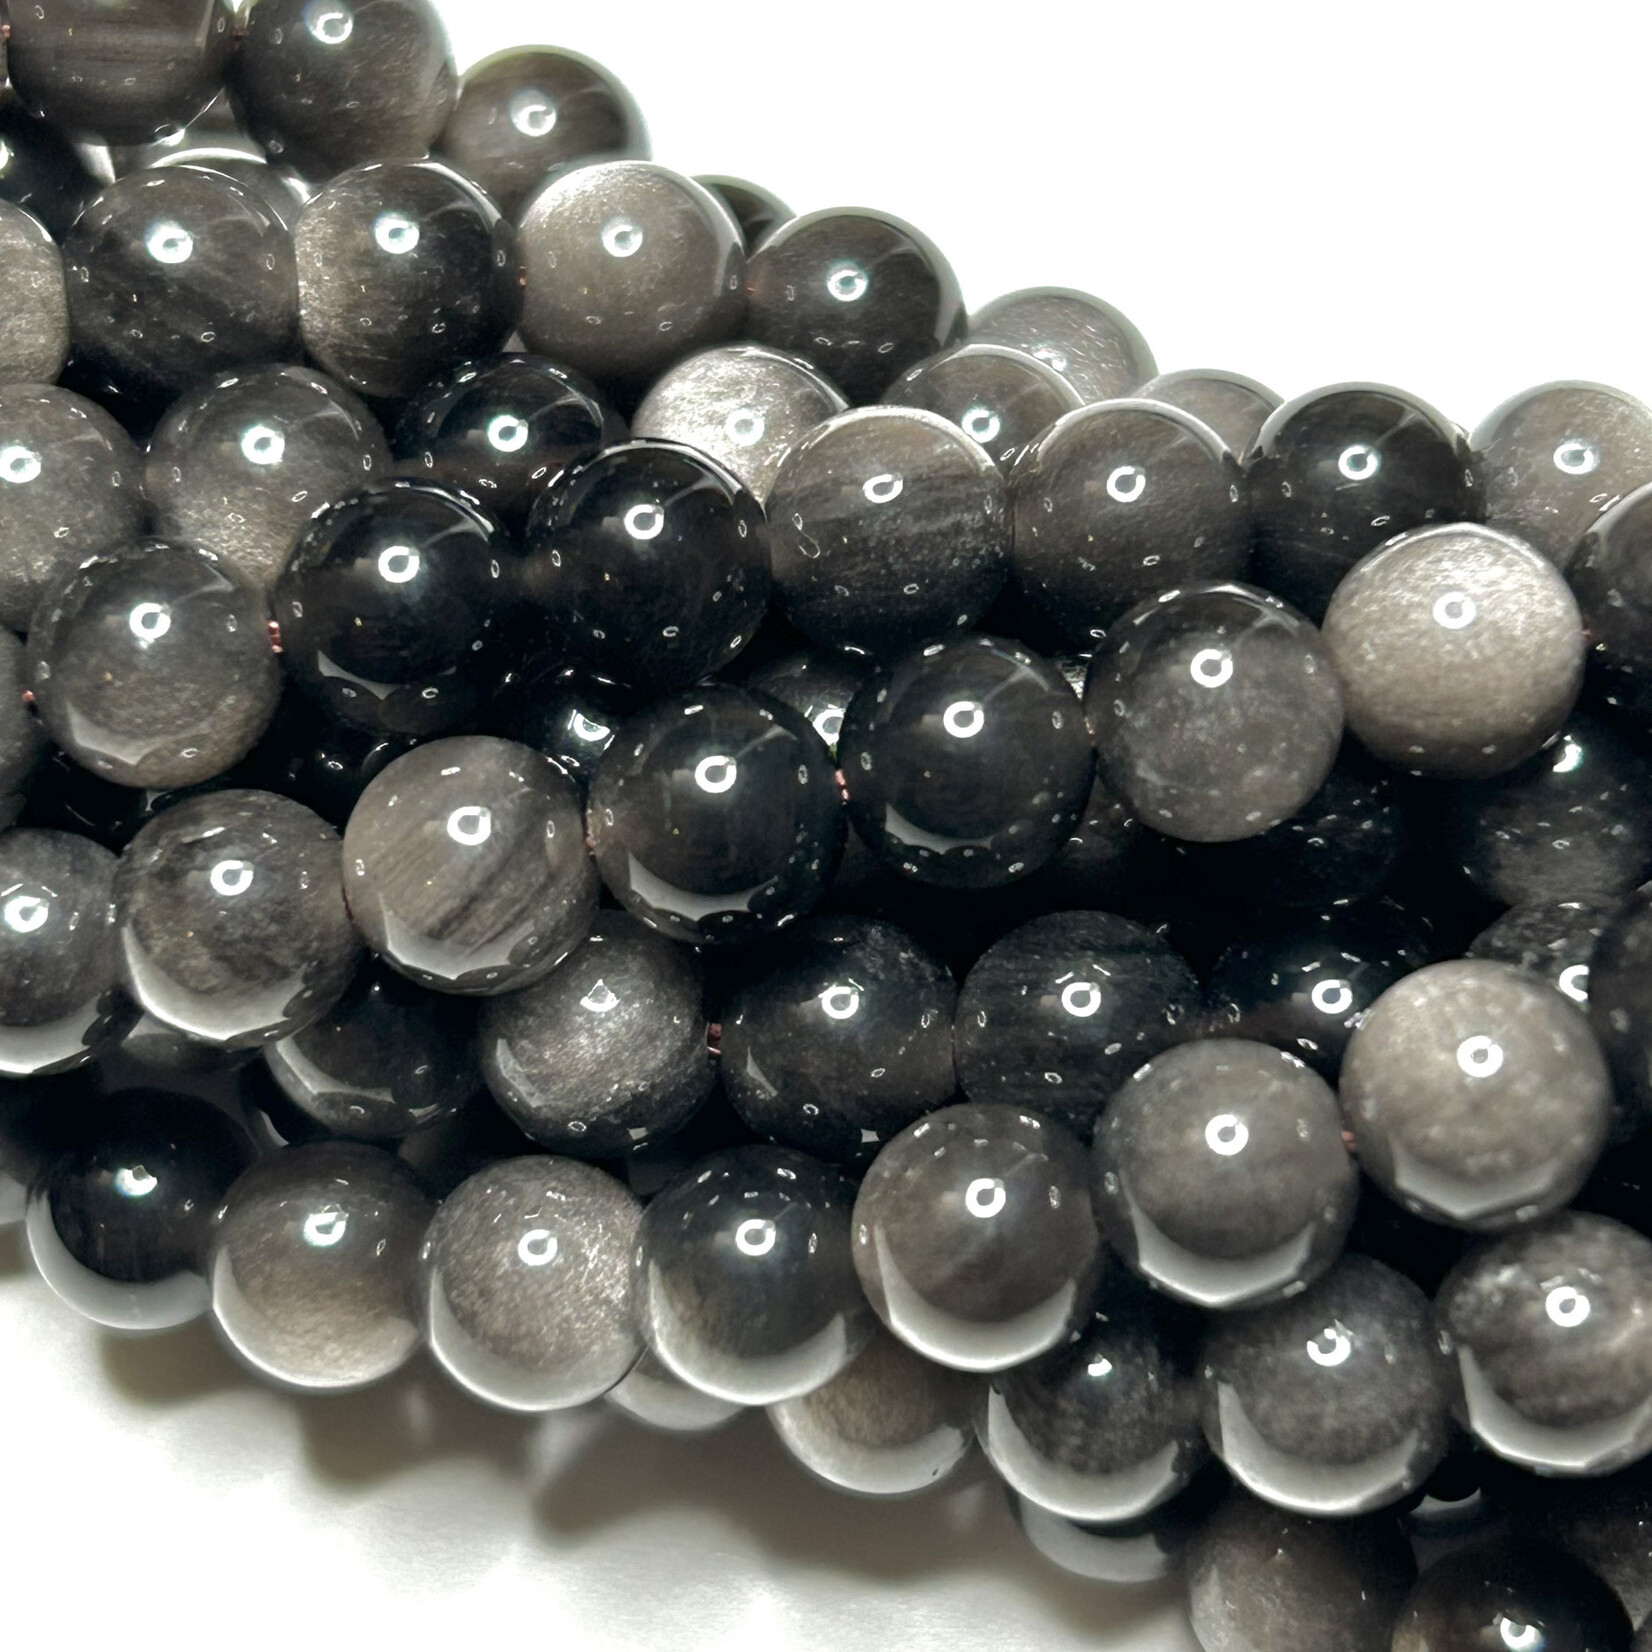 OBSIDIAN Silver Sheen Natural 6mm Round